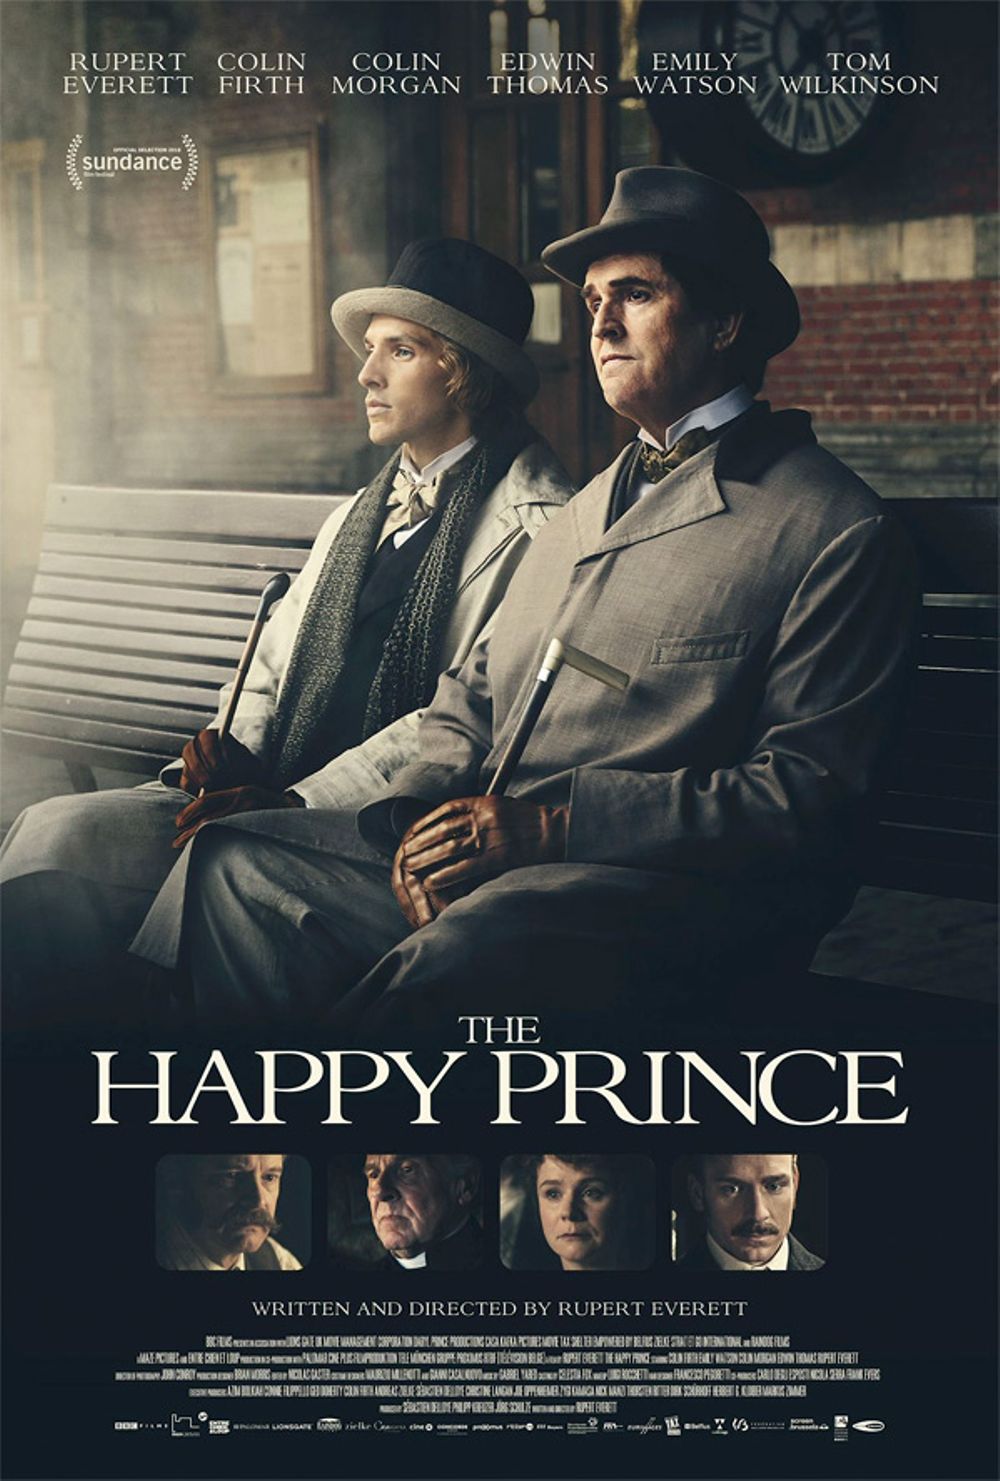 The Happy Prince Movie Review